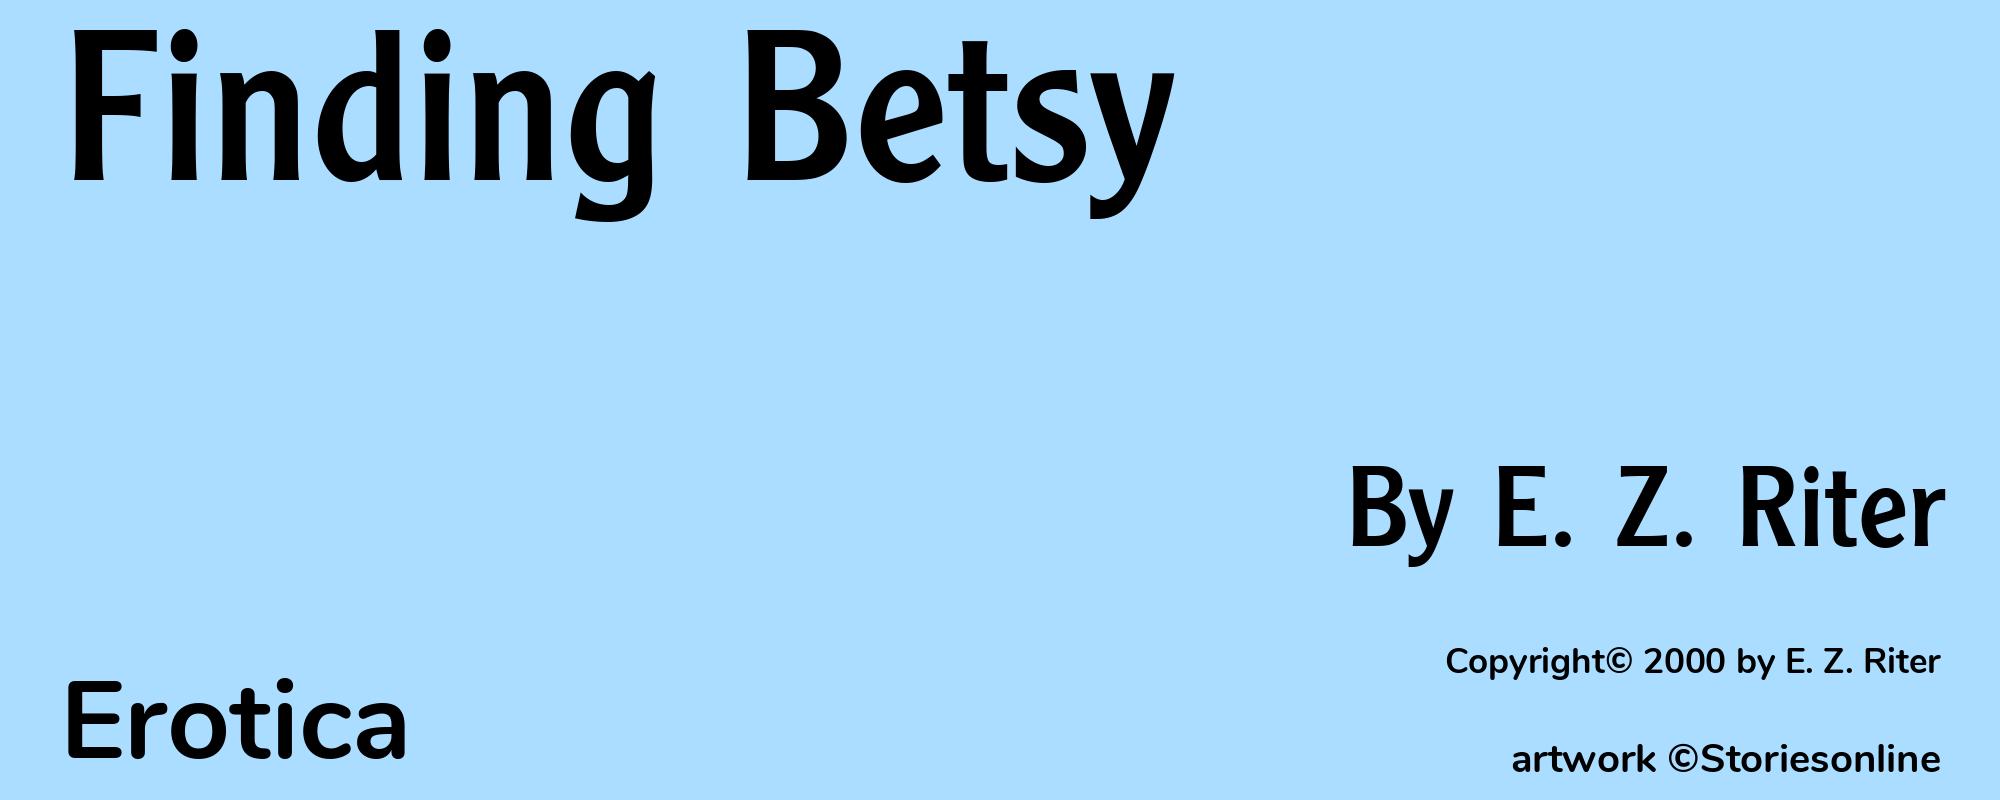 Finding Betsy - Cover